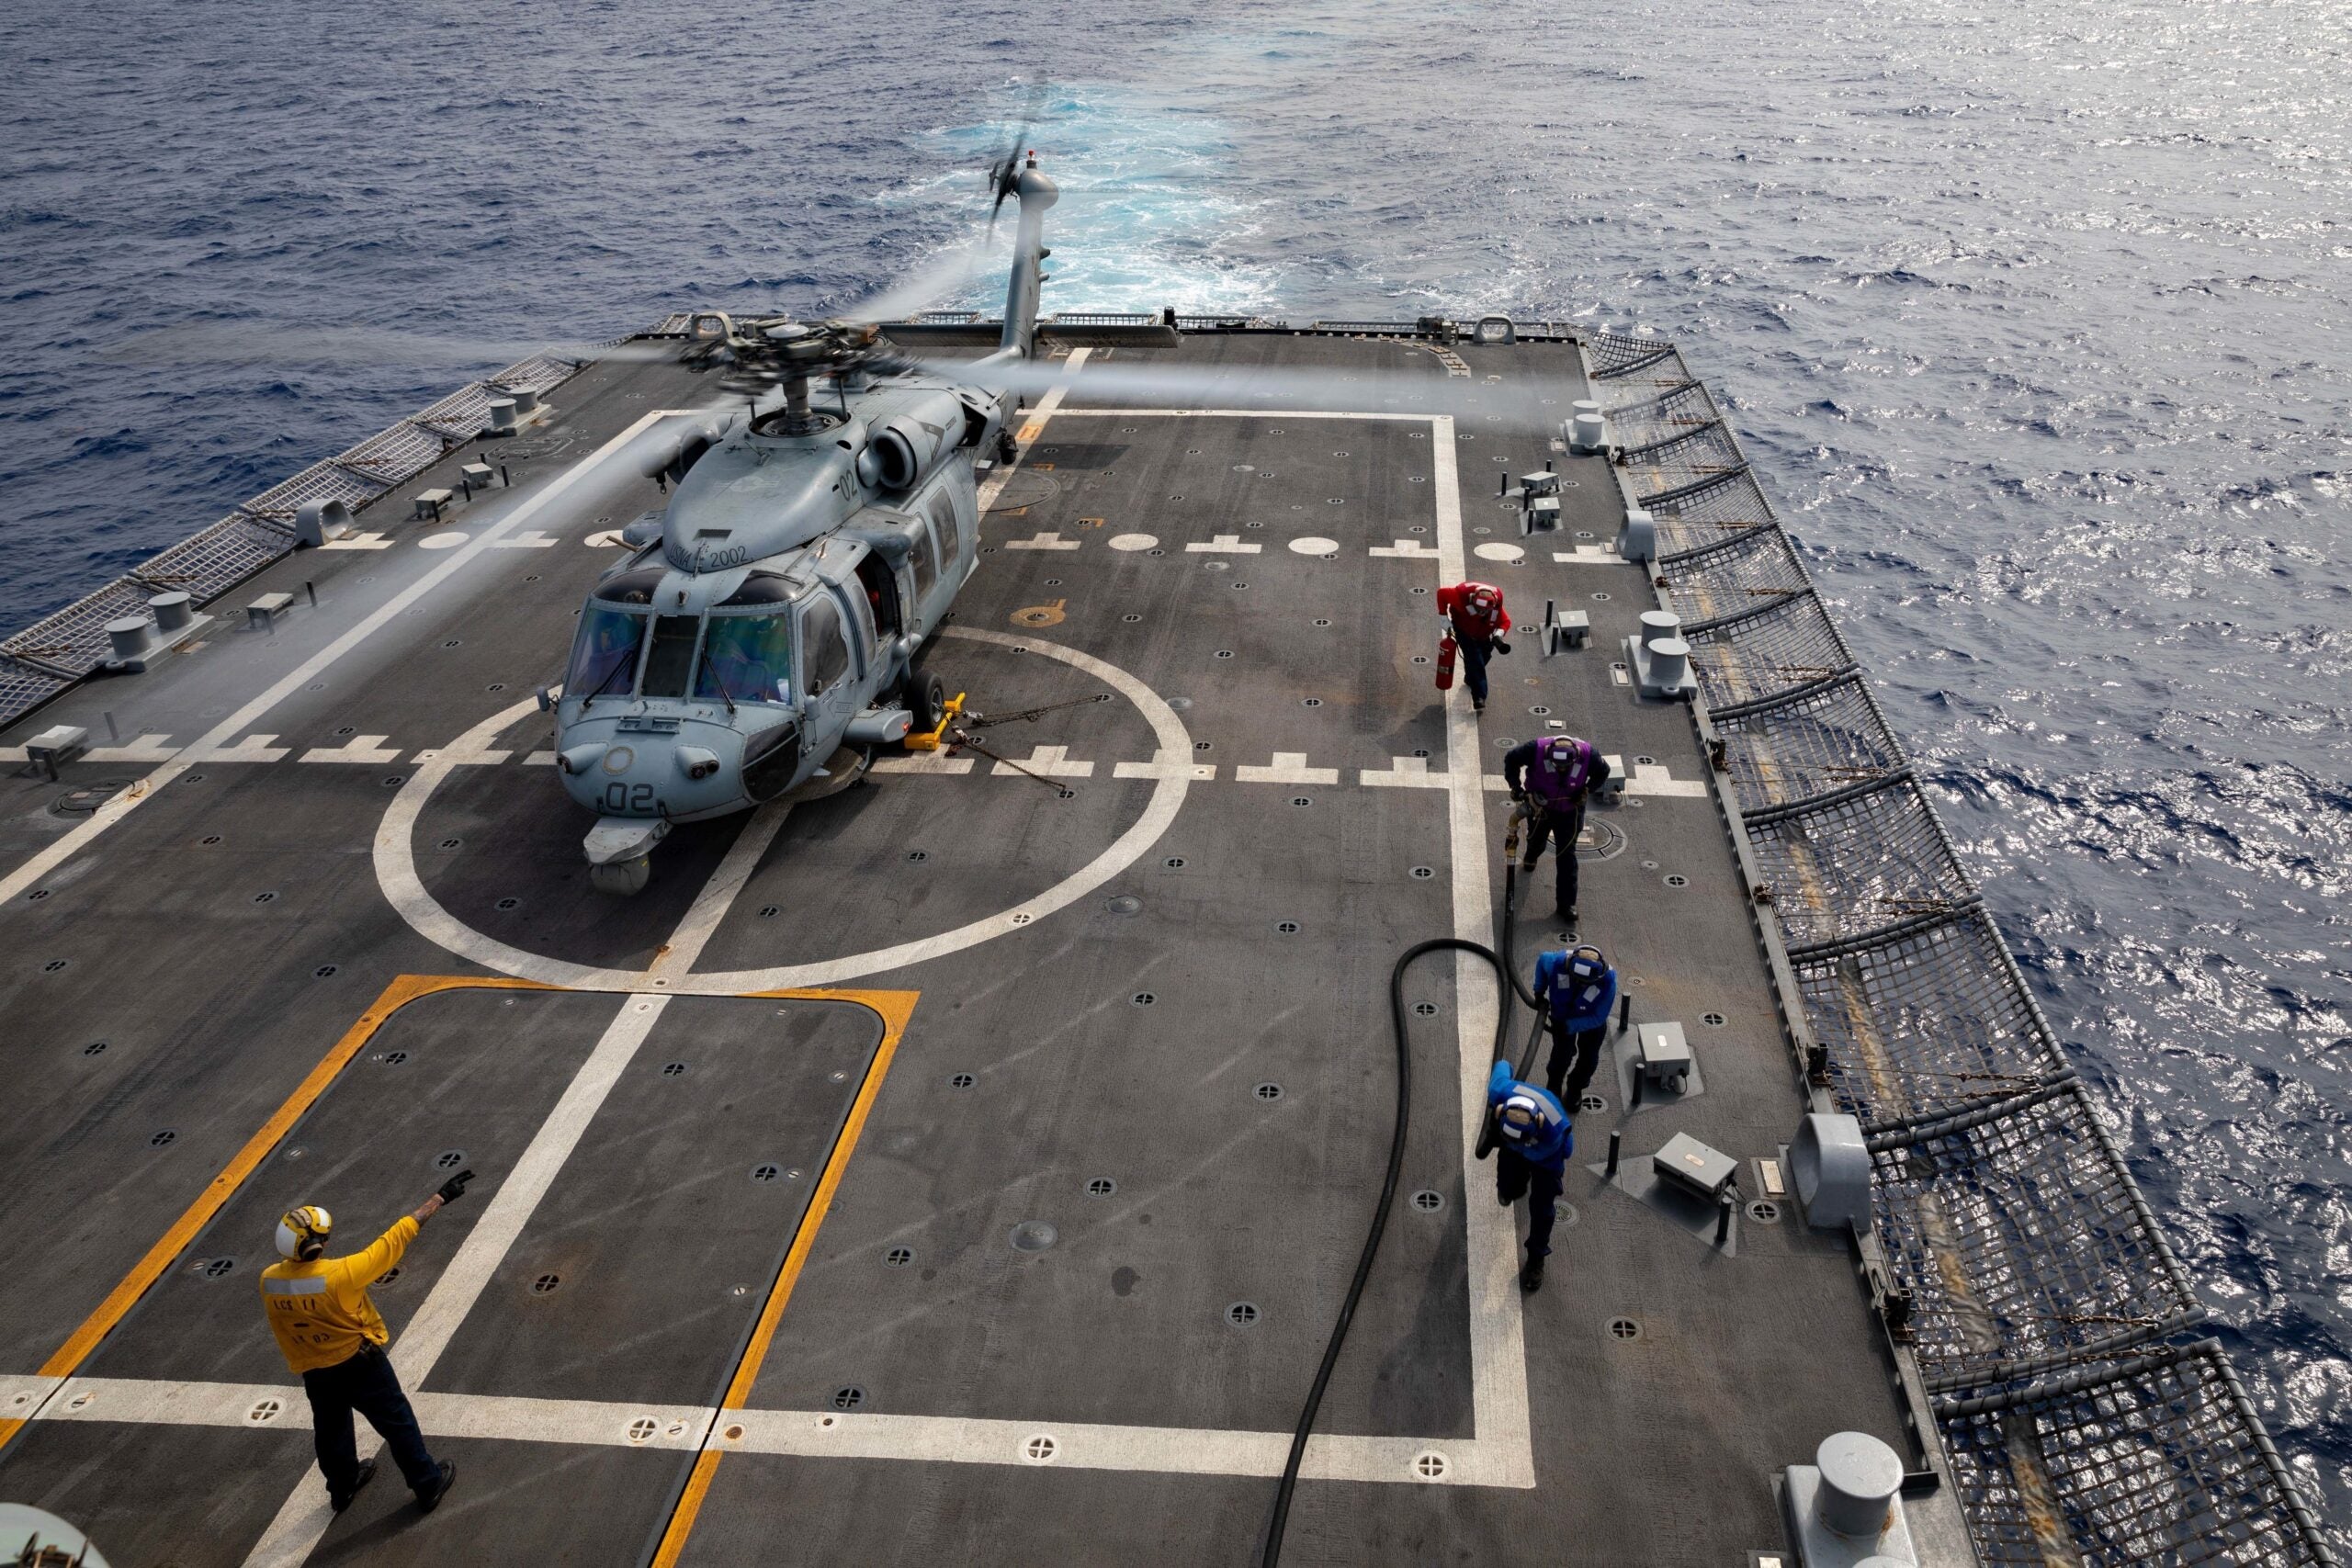 210413-N-RL695-1093 

CARIBBEAN SEA - (April 12, 2021) -- Sailors assigned to the Freedom-variant littoral combat ship USS Sioux City (LCS 11), conduct a hot refueling on an MH-60S Seahawk attached to the “Sea Knights” of Helicopter Sea Combat Squadron (HSC) 22, Detachment 3, April 13, 2021. Sioux City is deployed to the U.S. 4th Fleet area of operations to support Joint Interagency Task Force South’s mission, which includes counter-illicit drug trafficking missions in the Caribbean and Eastern Pacific. (U.S. Navy photo by Mass Communication Specialist 2nd Class Marianne Guemo/Released)